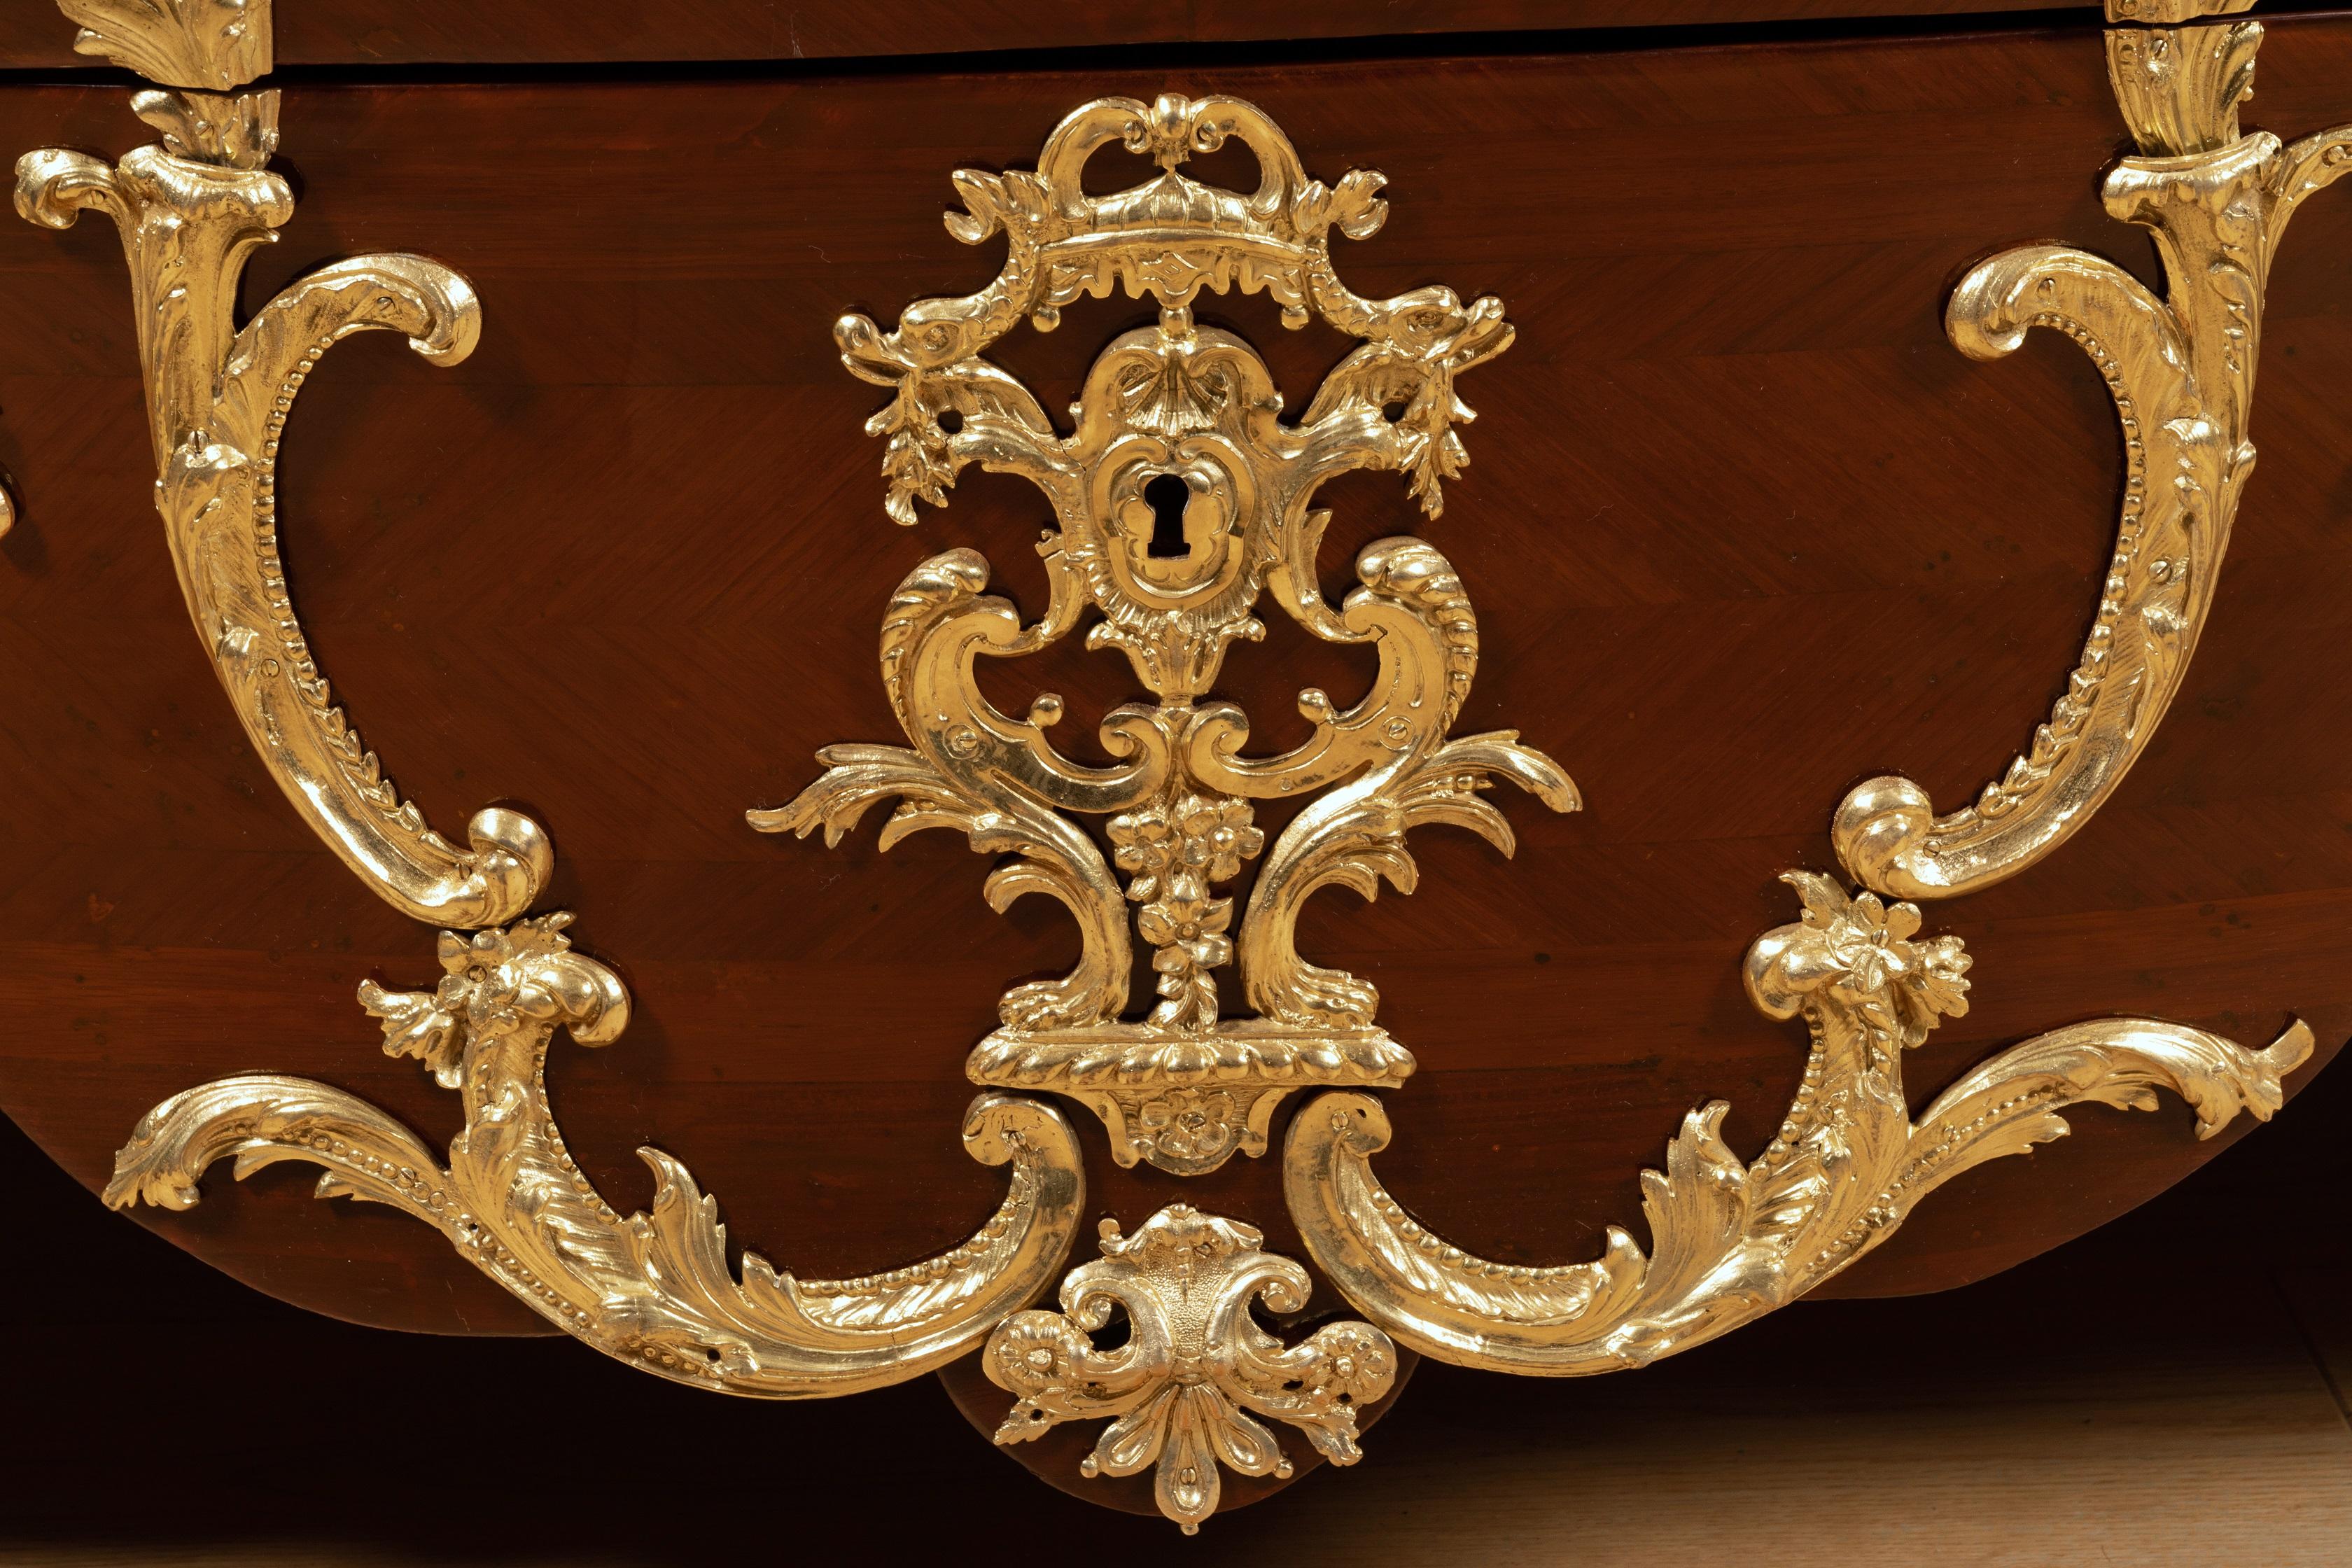 French 18th Century Regence Ormolu-Mounted Commode by Etienne Doirat For Sale 6